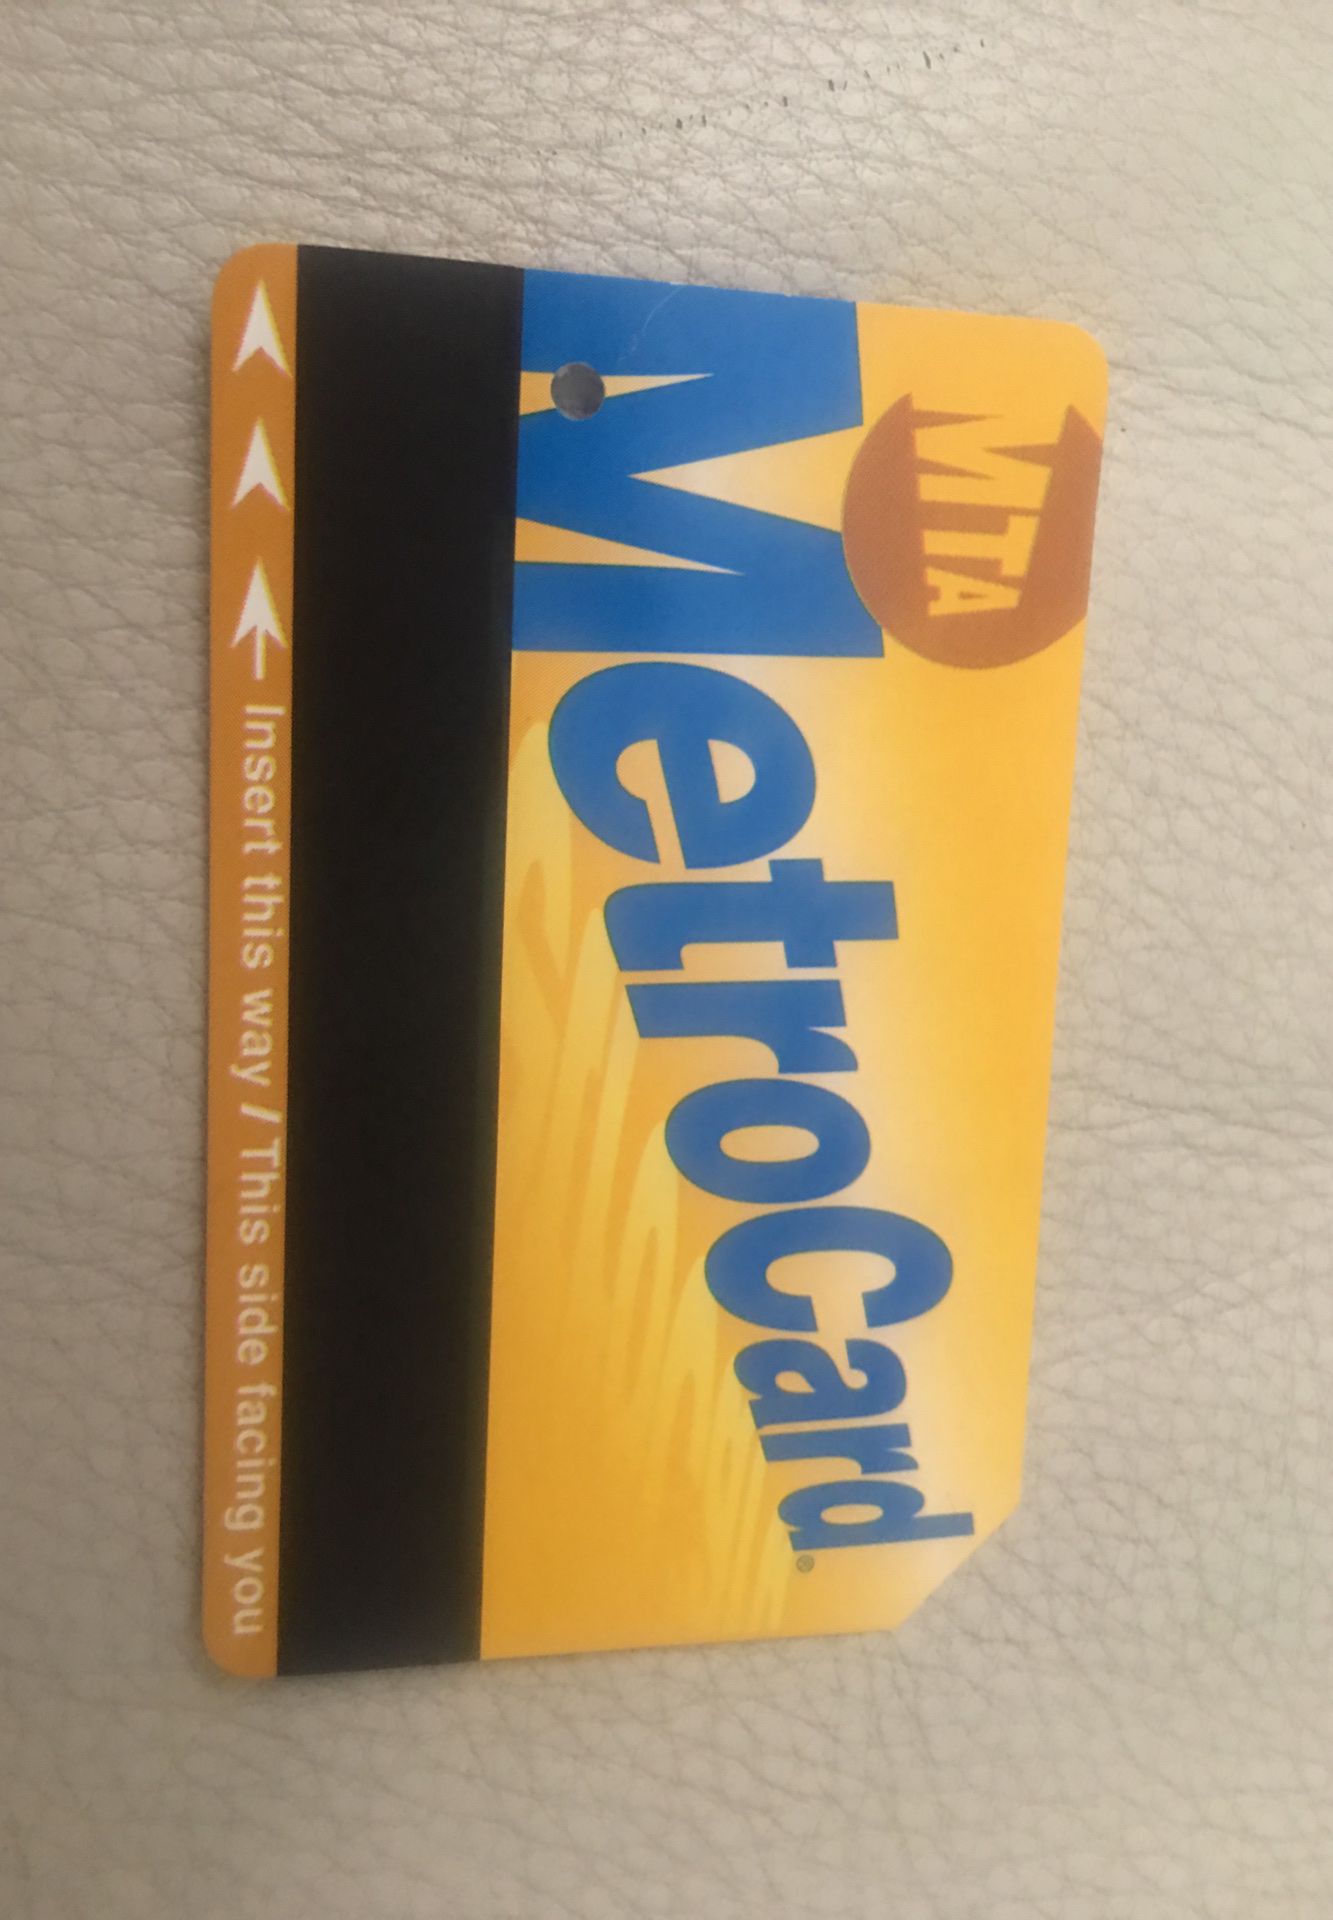 Metro card 50% off from City Expires Feb 2021